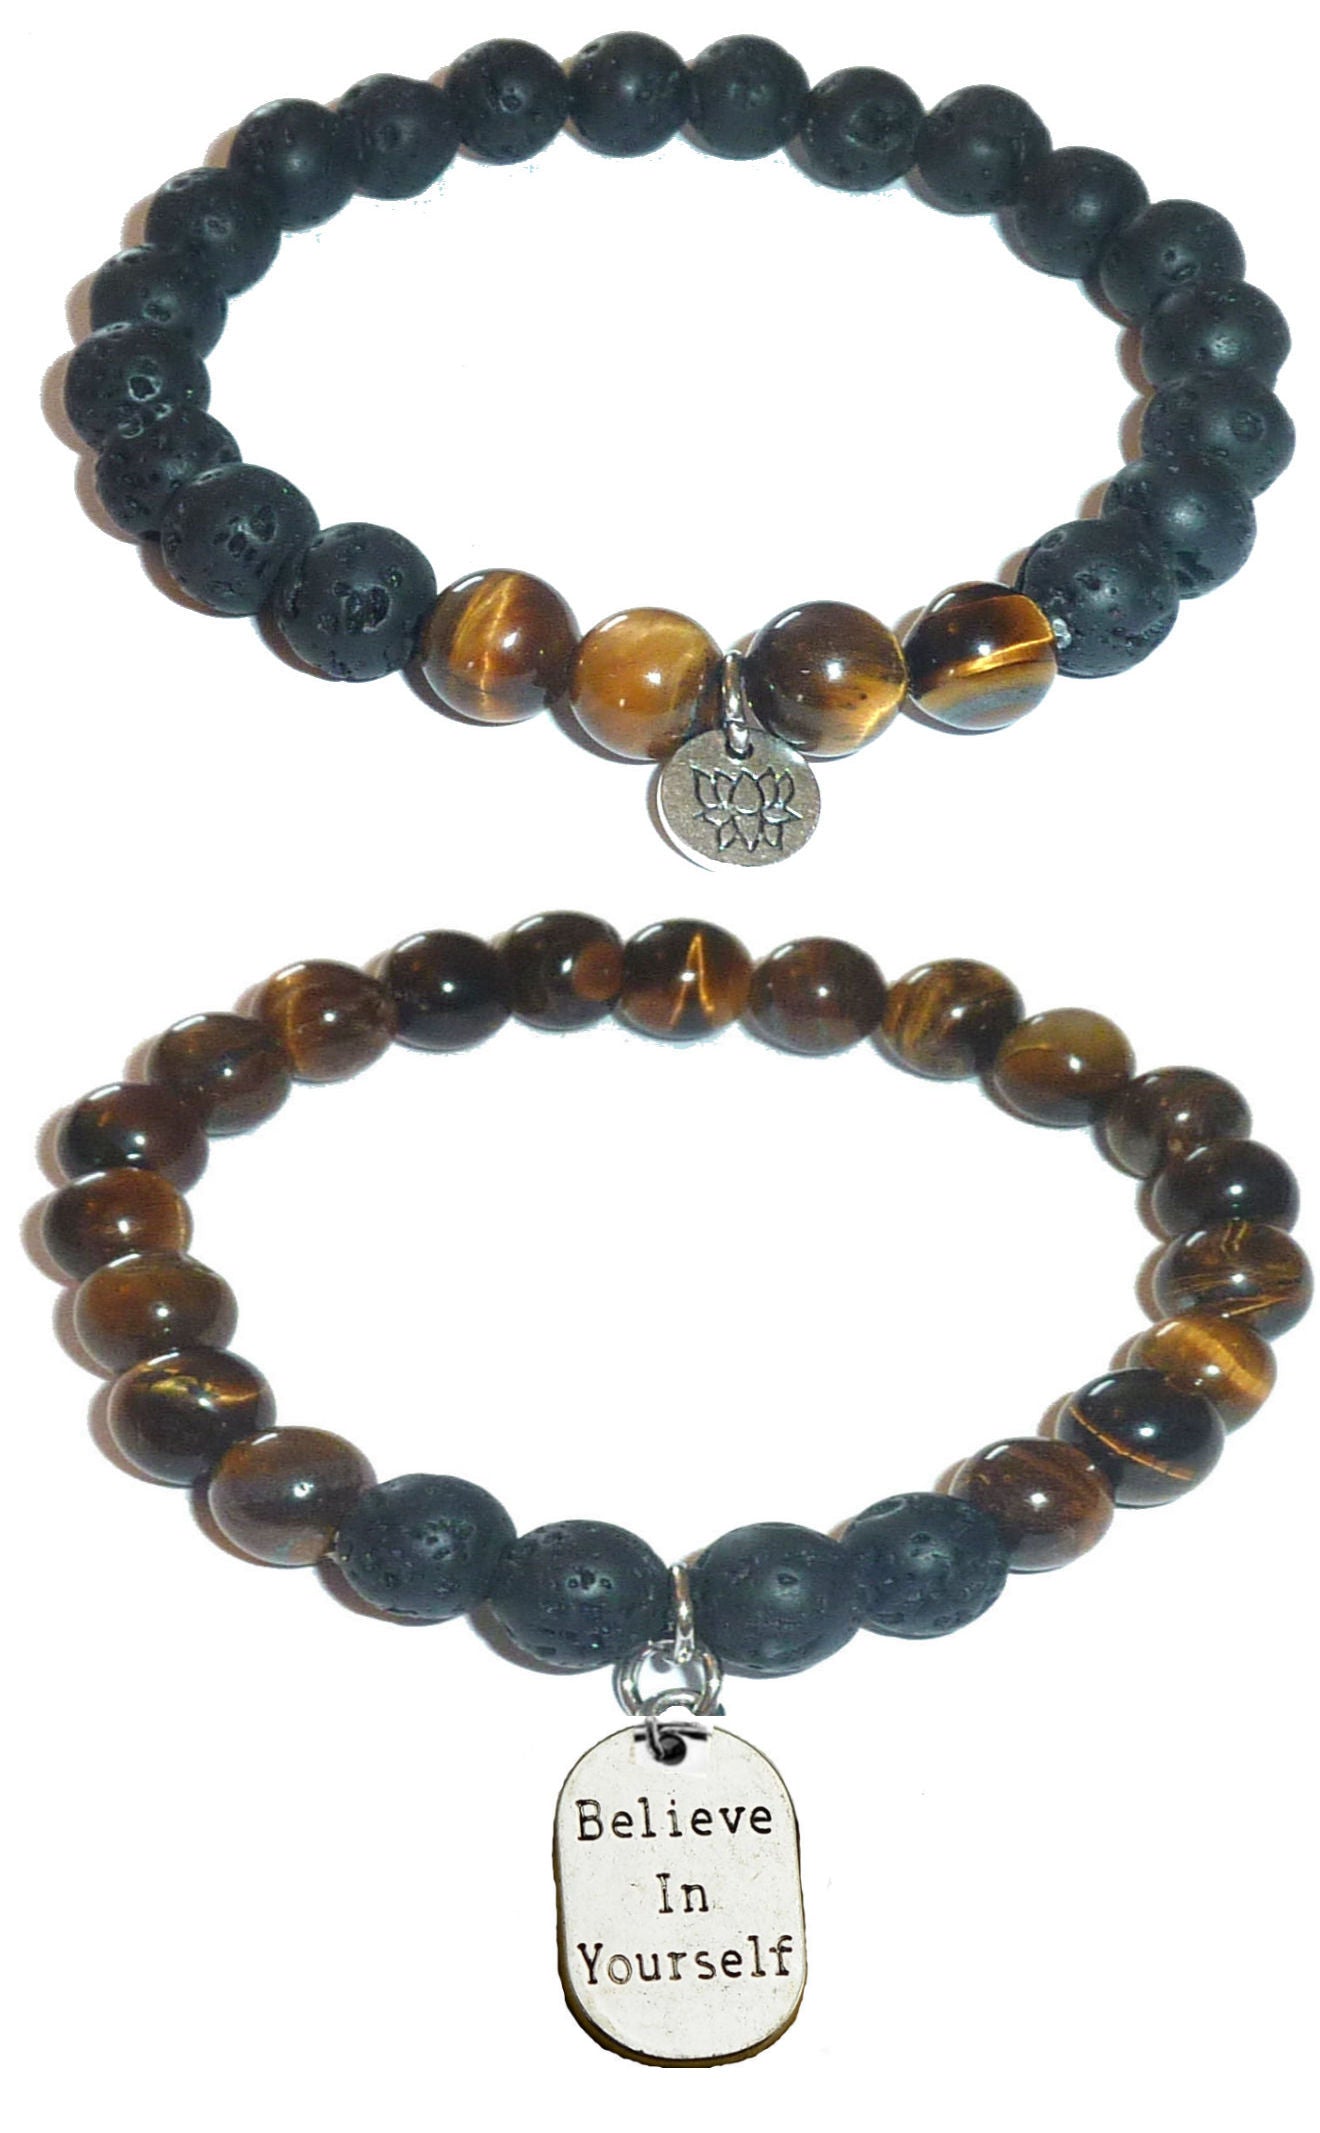 Believe in your self - Women's Tiger Eye & Black Lava Diffuser Yoga Beads Charm Stretch Bracelet Gift Set